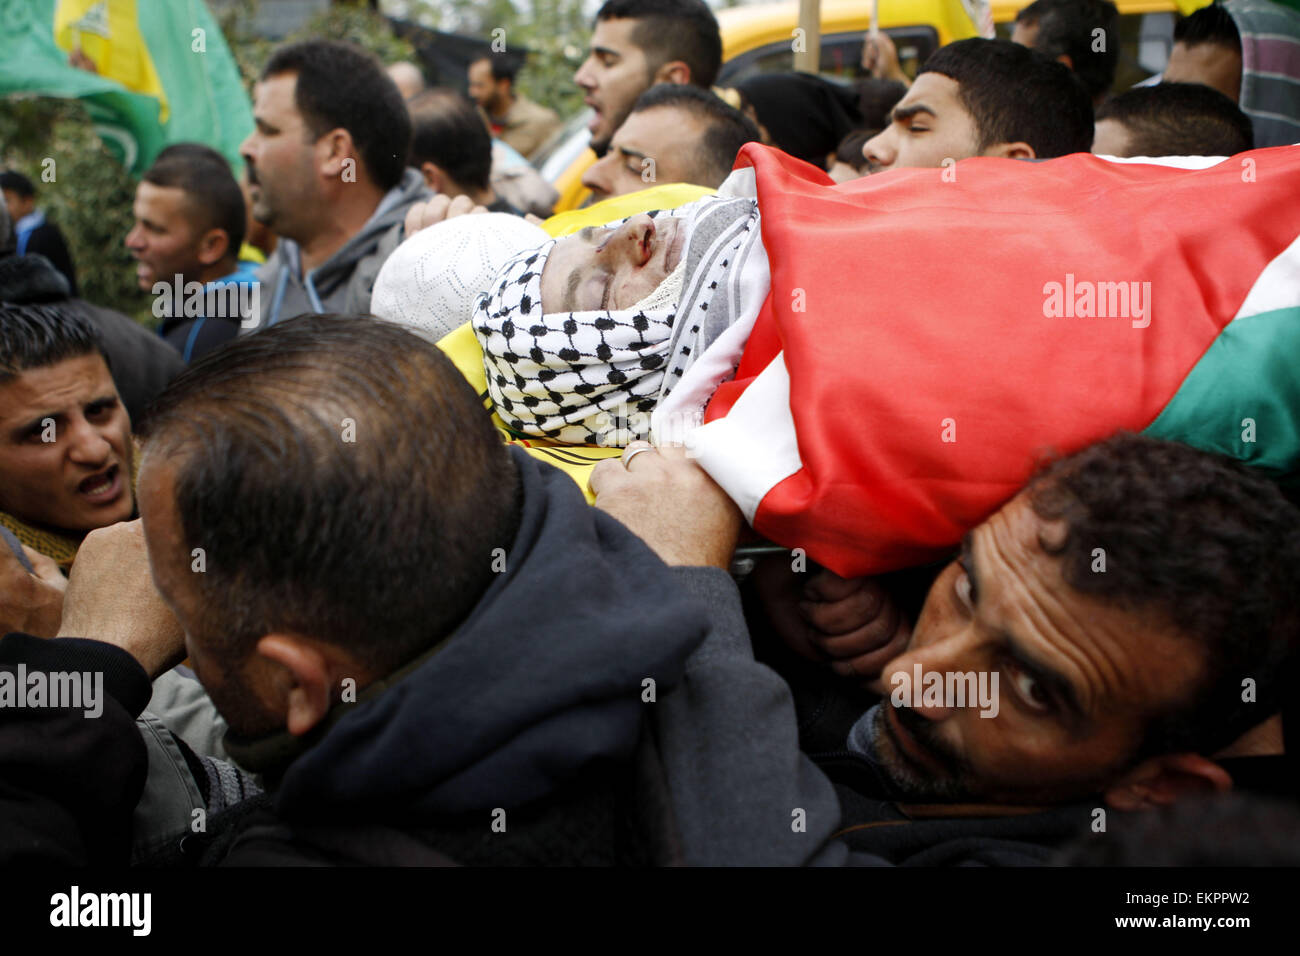 Sinjil, West Bank, Palestinian Territory. 13th Apr, 2015. Mourners carry the body of 27-year-old Palestinian Mohammed Jasser Karakra, during his funeral in the Sinjil village, in the occupied West Bank city of Ramallah, on April 13, 2015. Karakra stabbed two Israeli soldiers in the northern West Bank on April 8, 2015, wounding one seriously before being shot dead. It was the second knife attack in a week targeting Israeli soldiers and the latest in a wave of lone-wolf attacks which have been on the rise since last summer's 50-day war in the Gaza Strip (Credit Image: © Shadi Hatem/APA Images Stock Photo